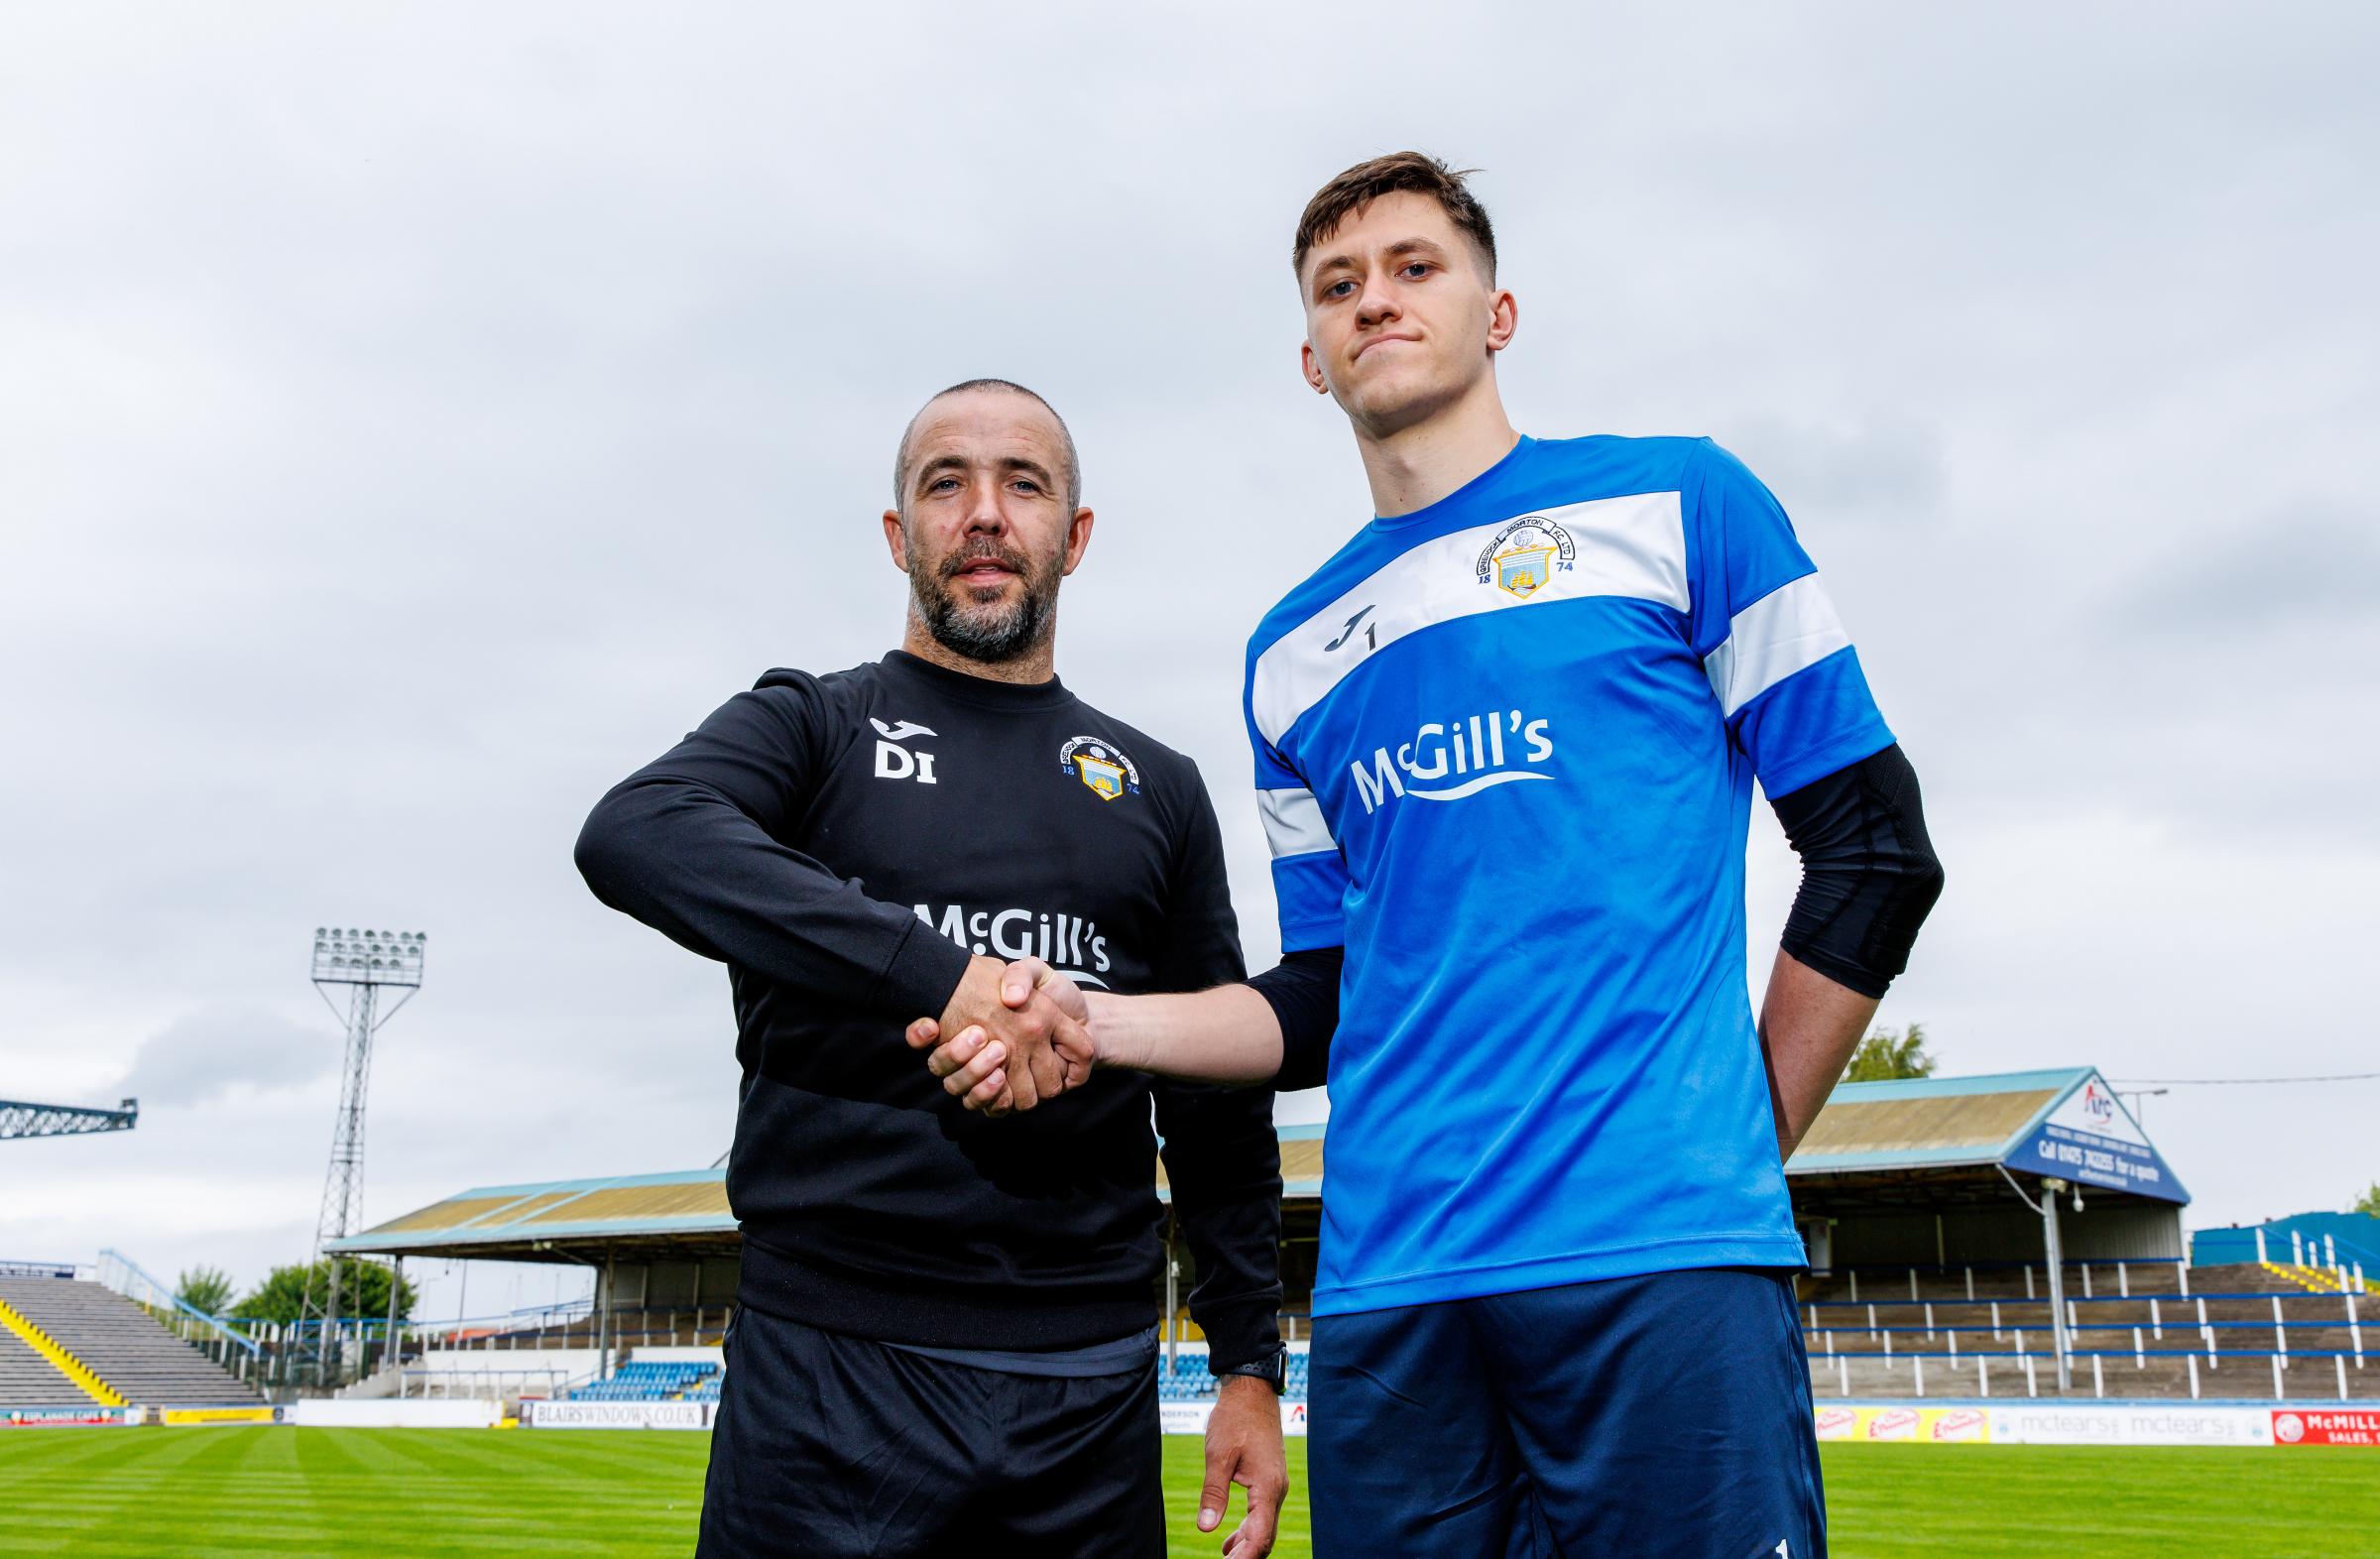 New Morton goalkeeper: 'I want to be first choice at Cappielow'